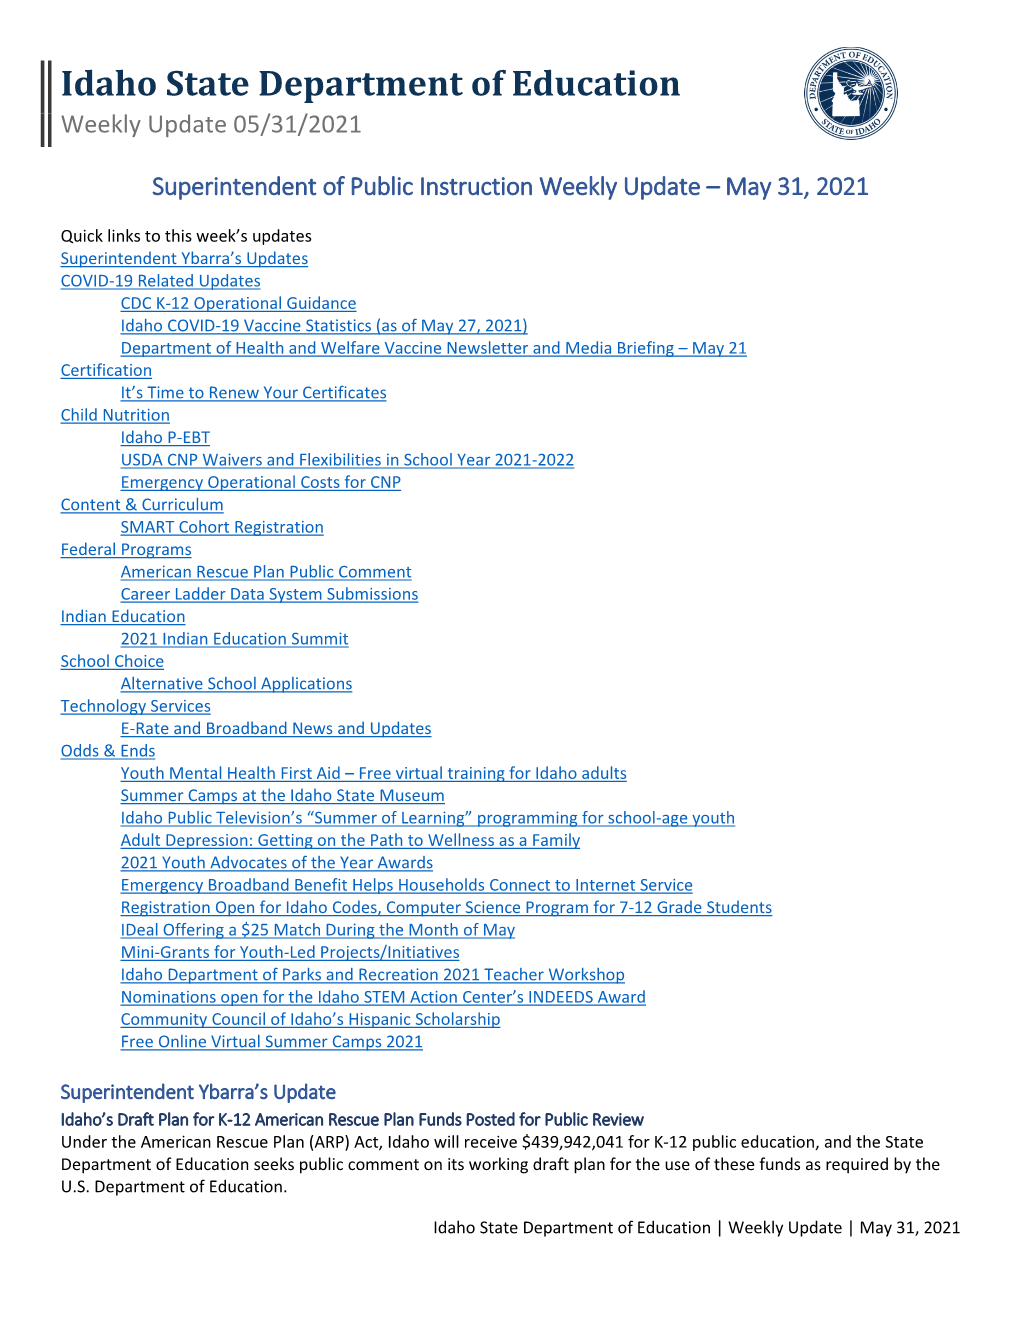 Superintendent of Public Instruction Weekly Update – May 31, 2021